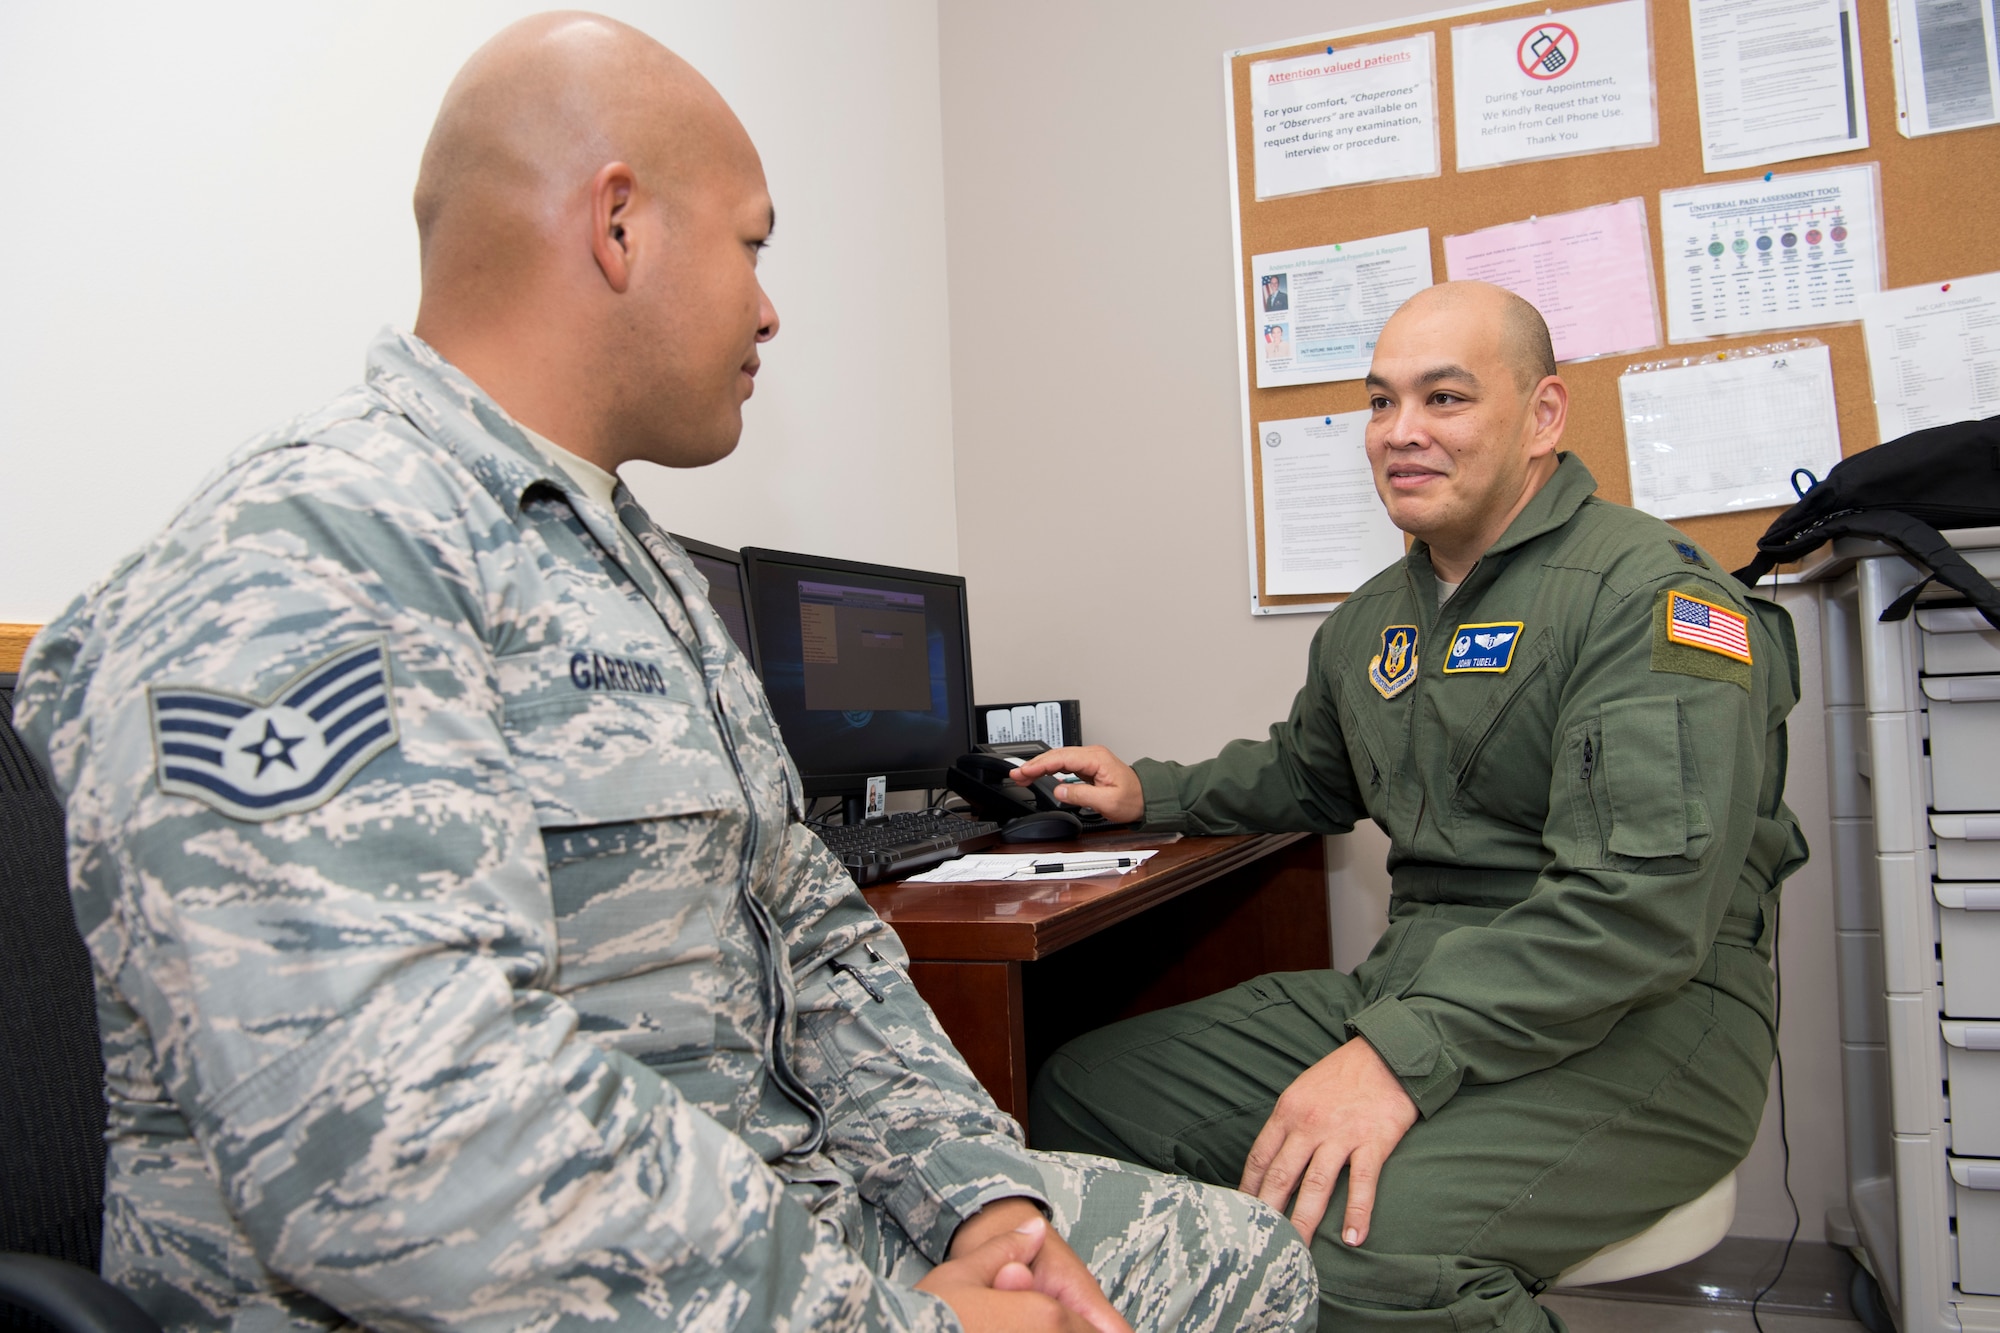 U.S. Air Force Lt. Col. John Tudela, Air Force Reserve’s 624th Aerospace Medicine Flight commander and flight surgeon, talks with Staff Sgt. Roby Garrido, Air National Guard’s 254th Red Horse Squadron management and analysis journeyman, as part of individual medical readiness requirements during a unit training assembly at Andersen Air Force Base, Guam, June 3, 2018.